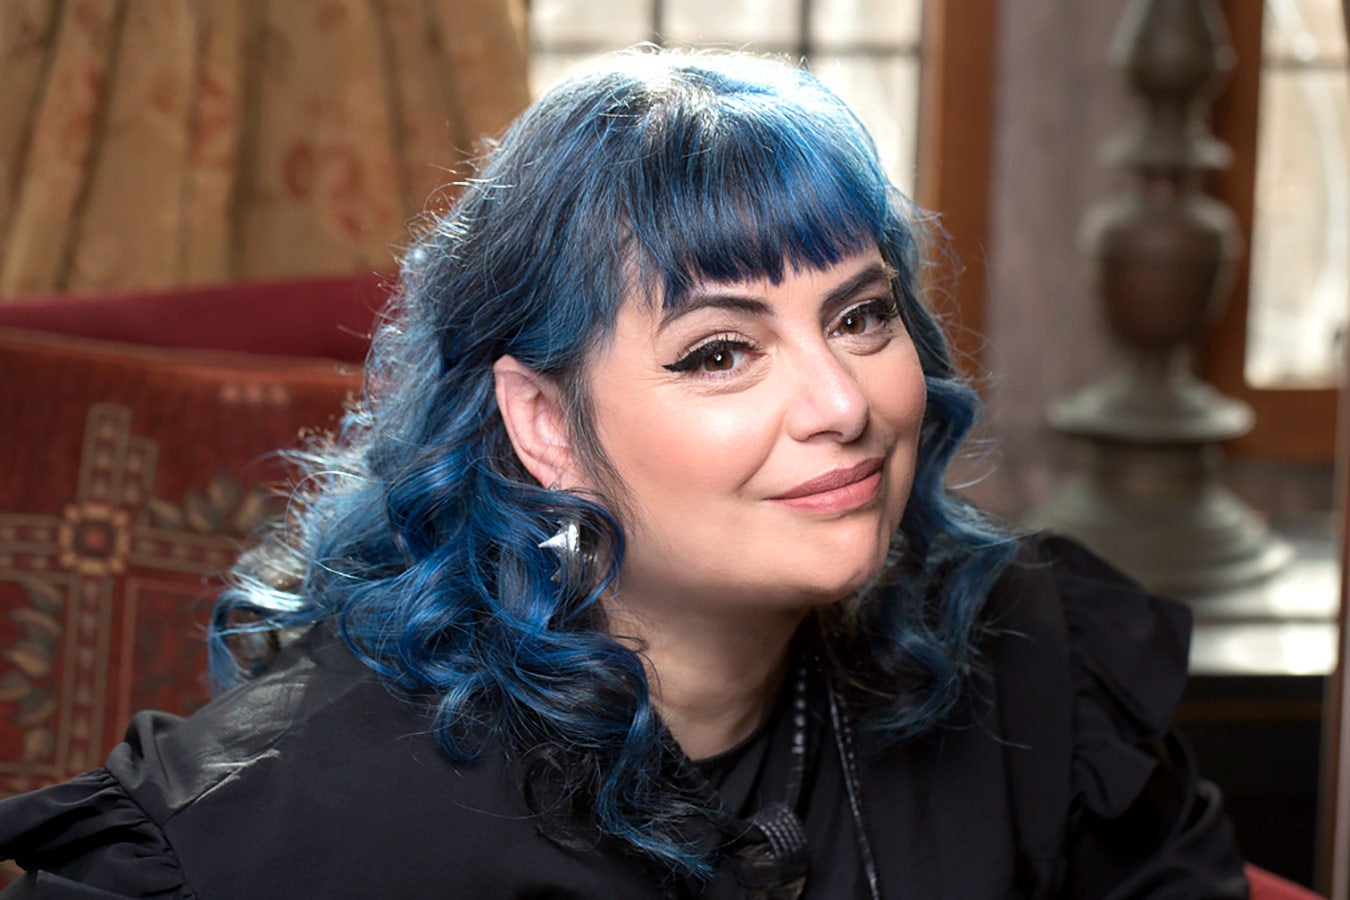 Holly Black, with blue hair and pointed ears, smiling at the camera.